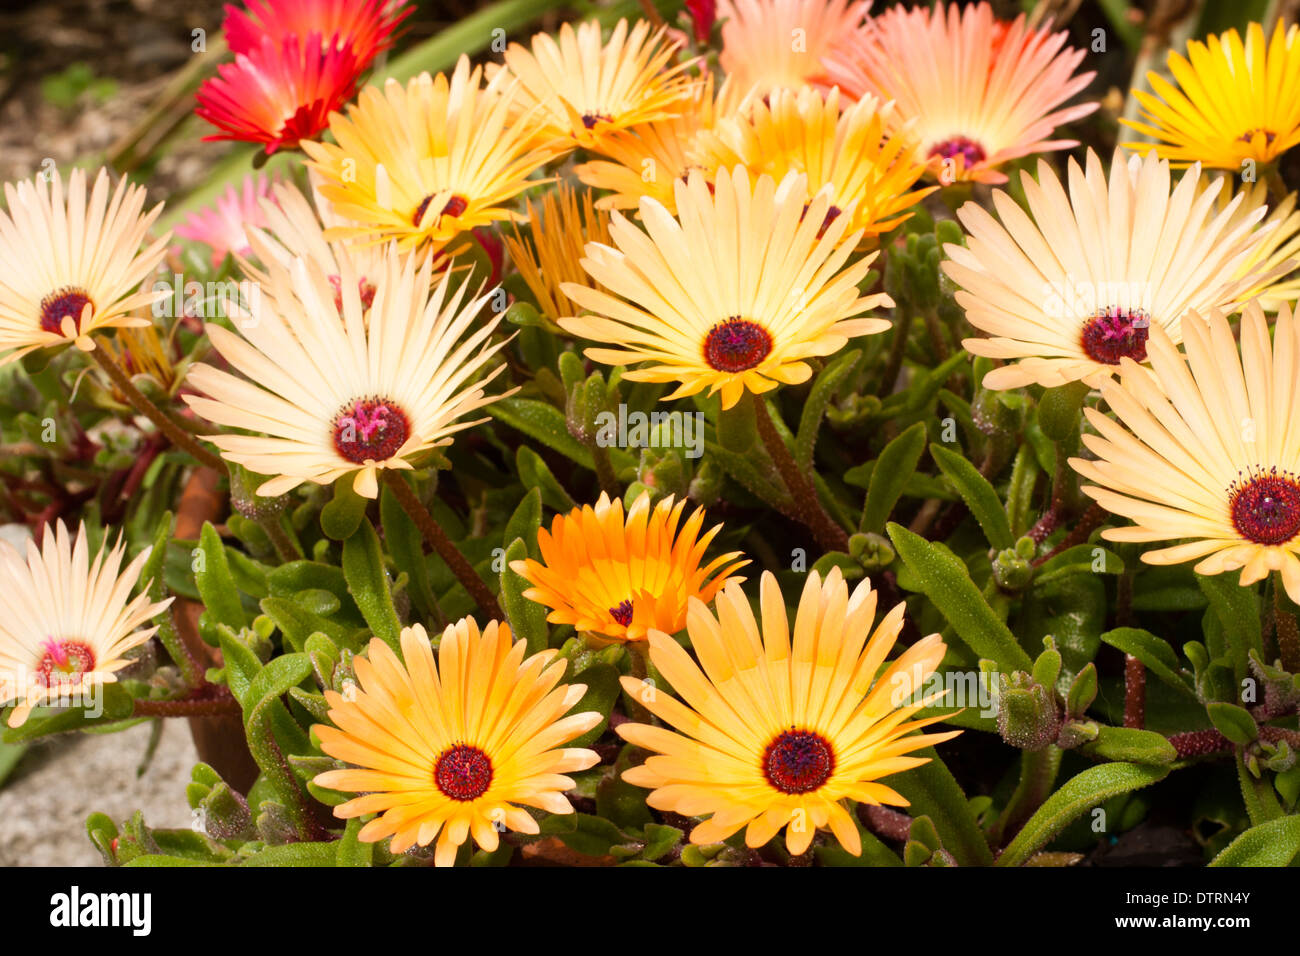 Colourful annual ice plants, Mesembryanthemum hybrids. opening their flowers in early summer sunlight. Stock Photo